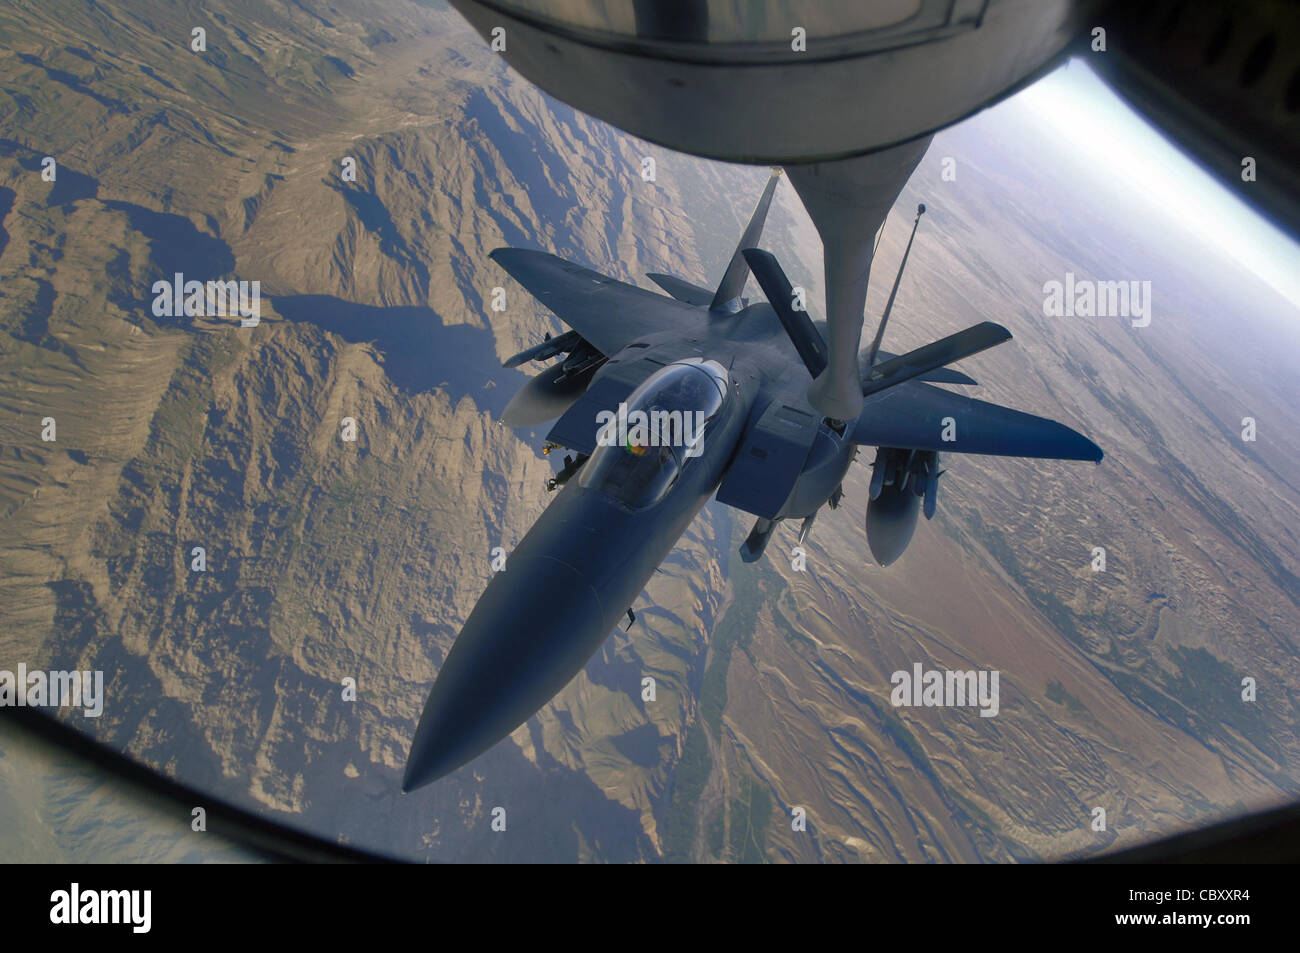 An F-15E Strike Eagle refuels over the mountains of Afghanistan April 12, 2006. The Strike Eagle is a dual-role fighter designed to perform air-to-air and air-to-ground missions. An array of avionics and electronics systems gives the F-15E the capability to fight at low altitude, day or night, and in all weather. Stock Photo